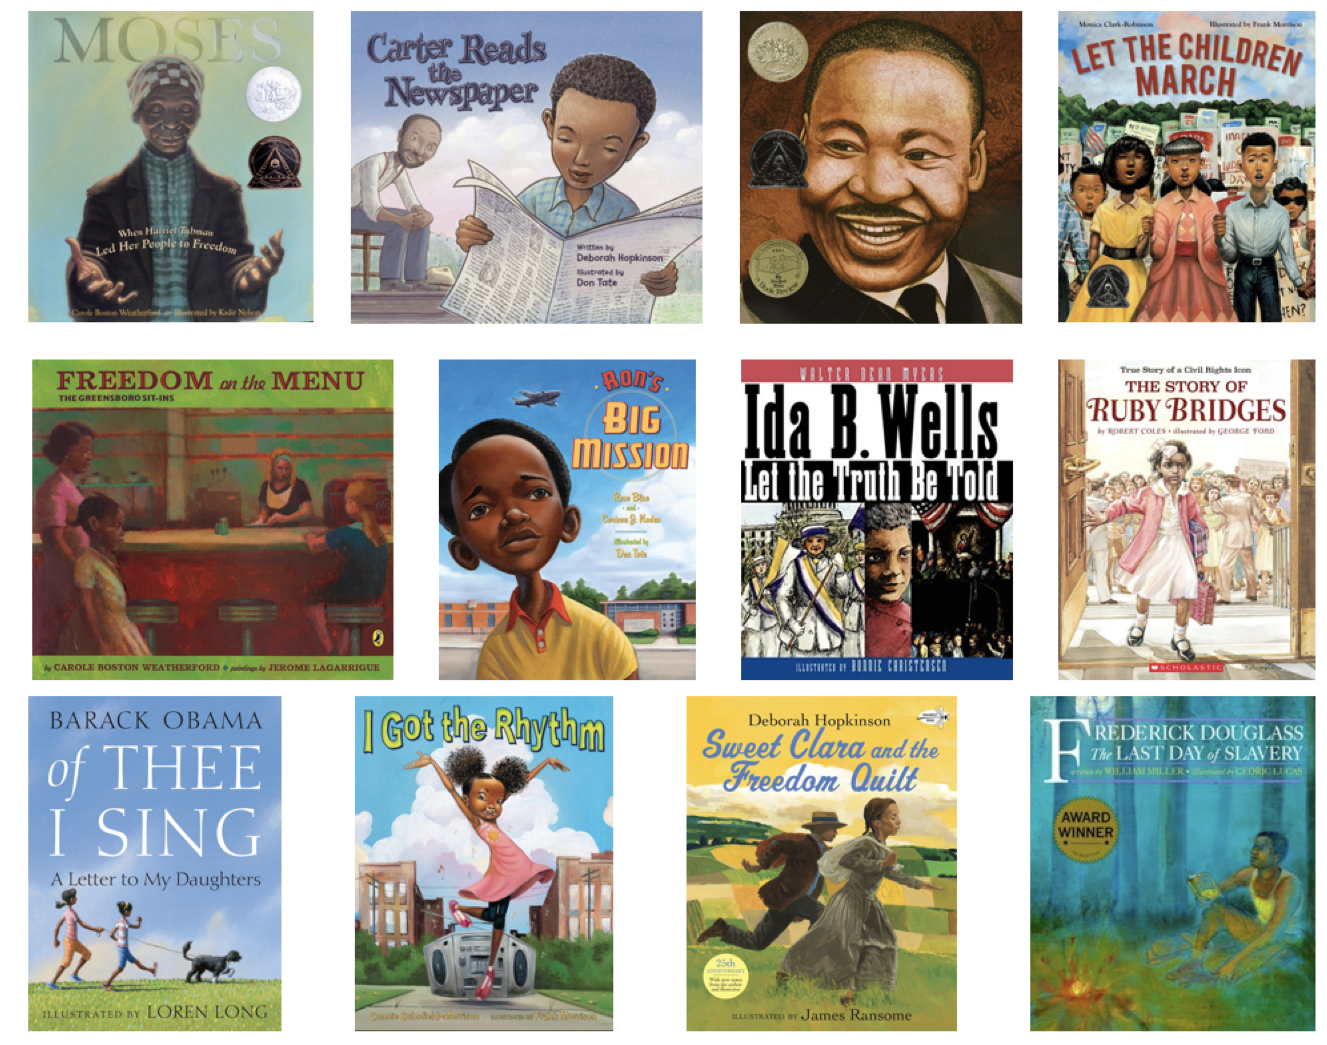 The “Black History Month is Every Month” Book List curated by Reading Partners